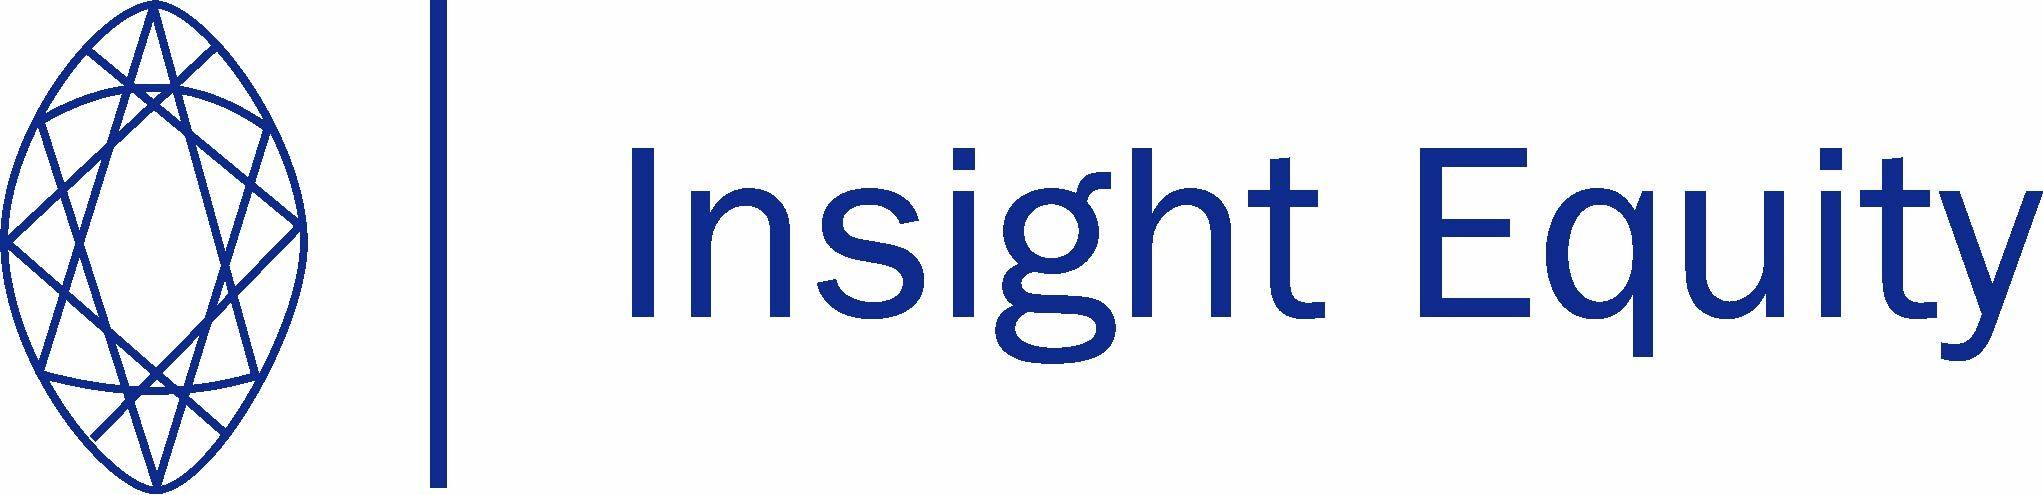 Panolam Logo - insight equity logo revised. Panolam Surface Systems